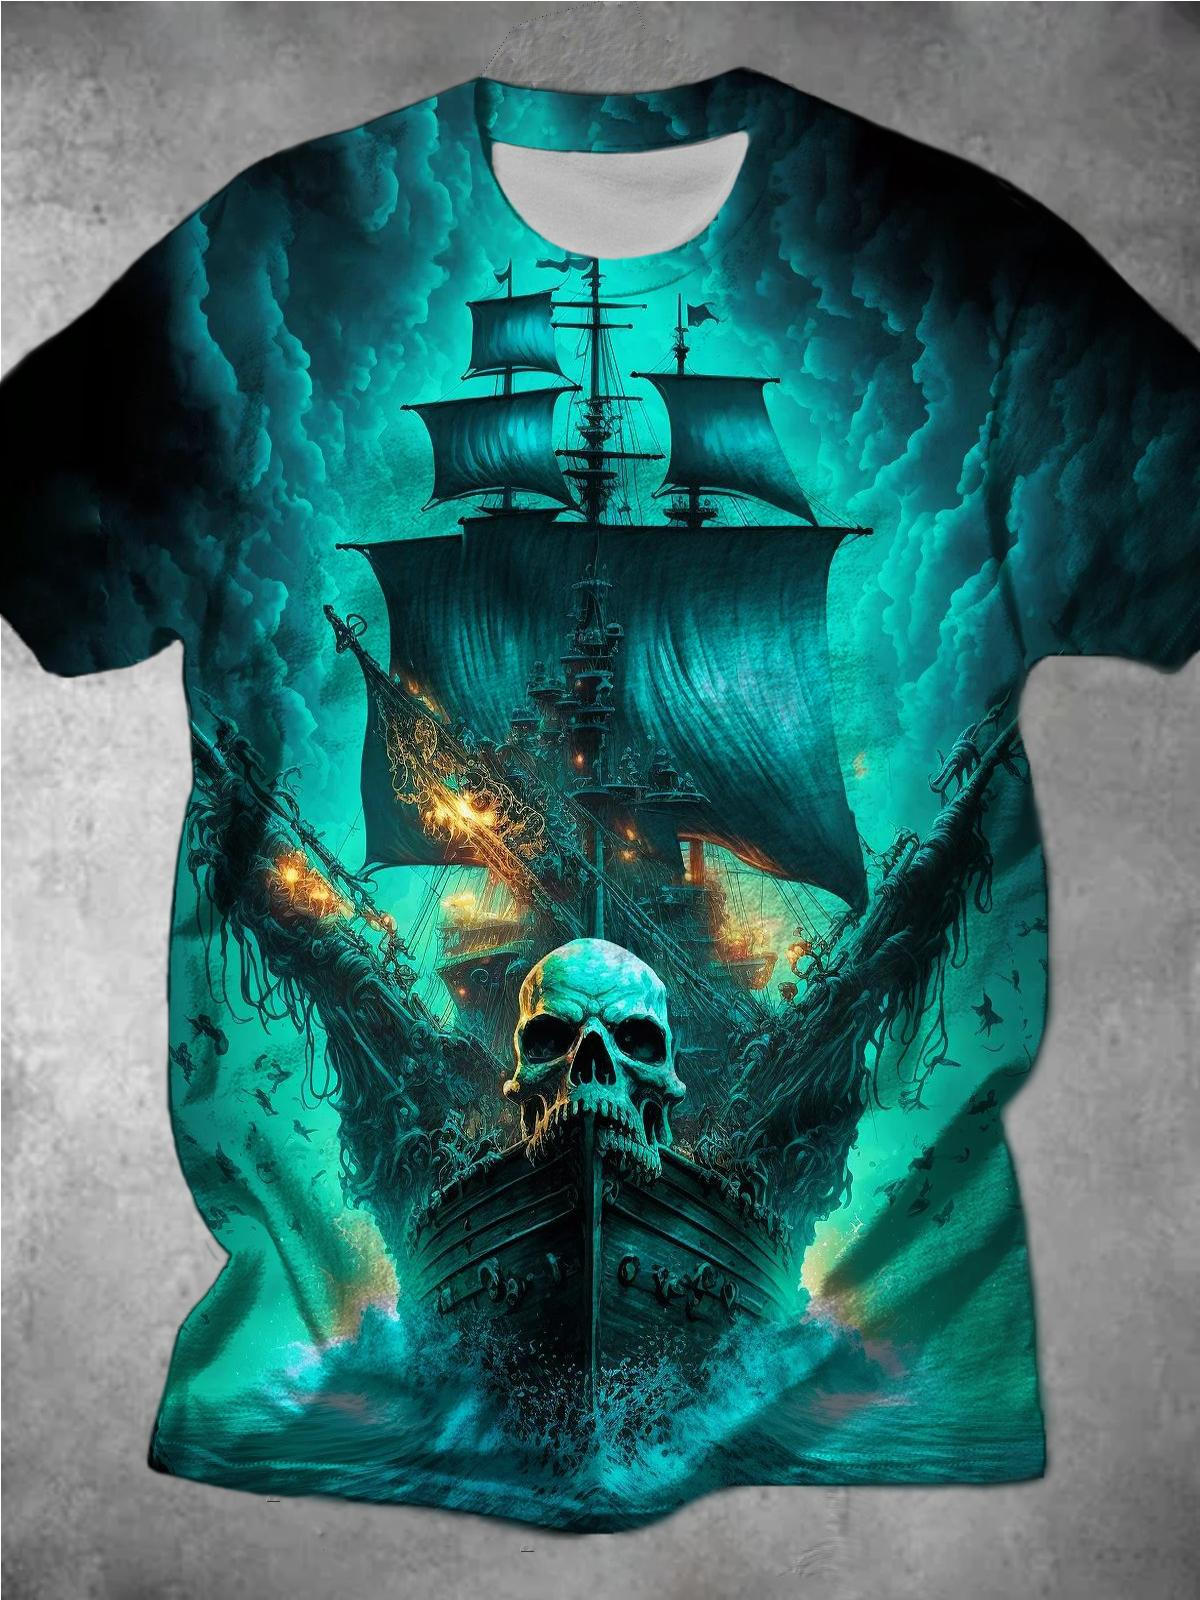 Personalized Pirate Ship Print Round Neck Short-Sleeved Men's T-Shirt